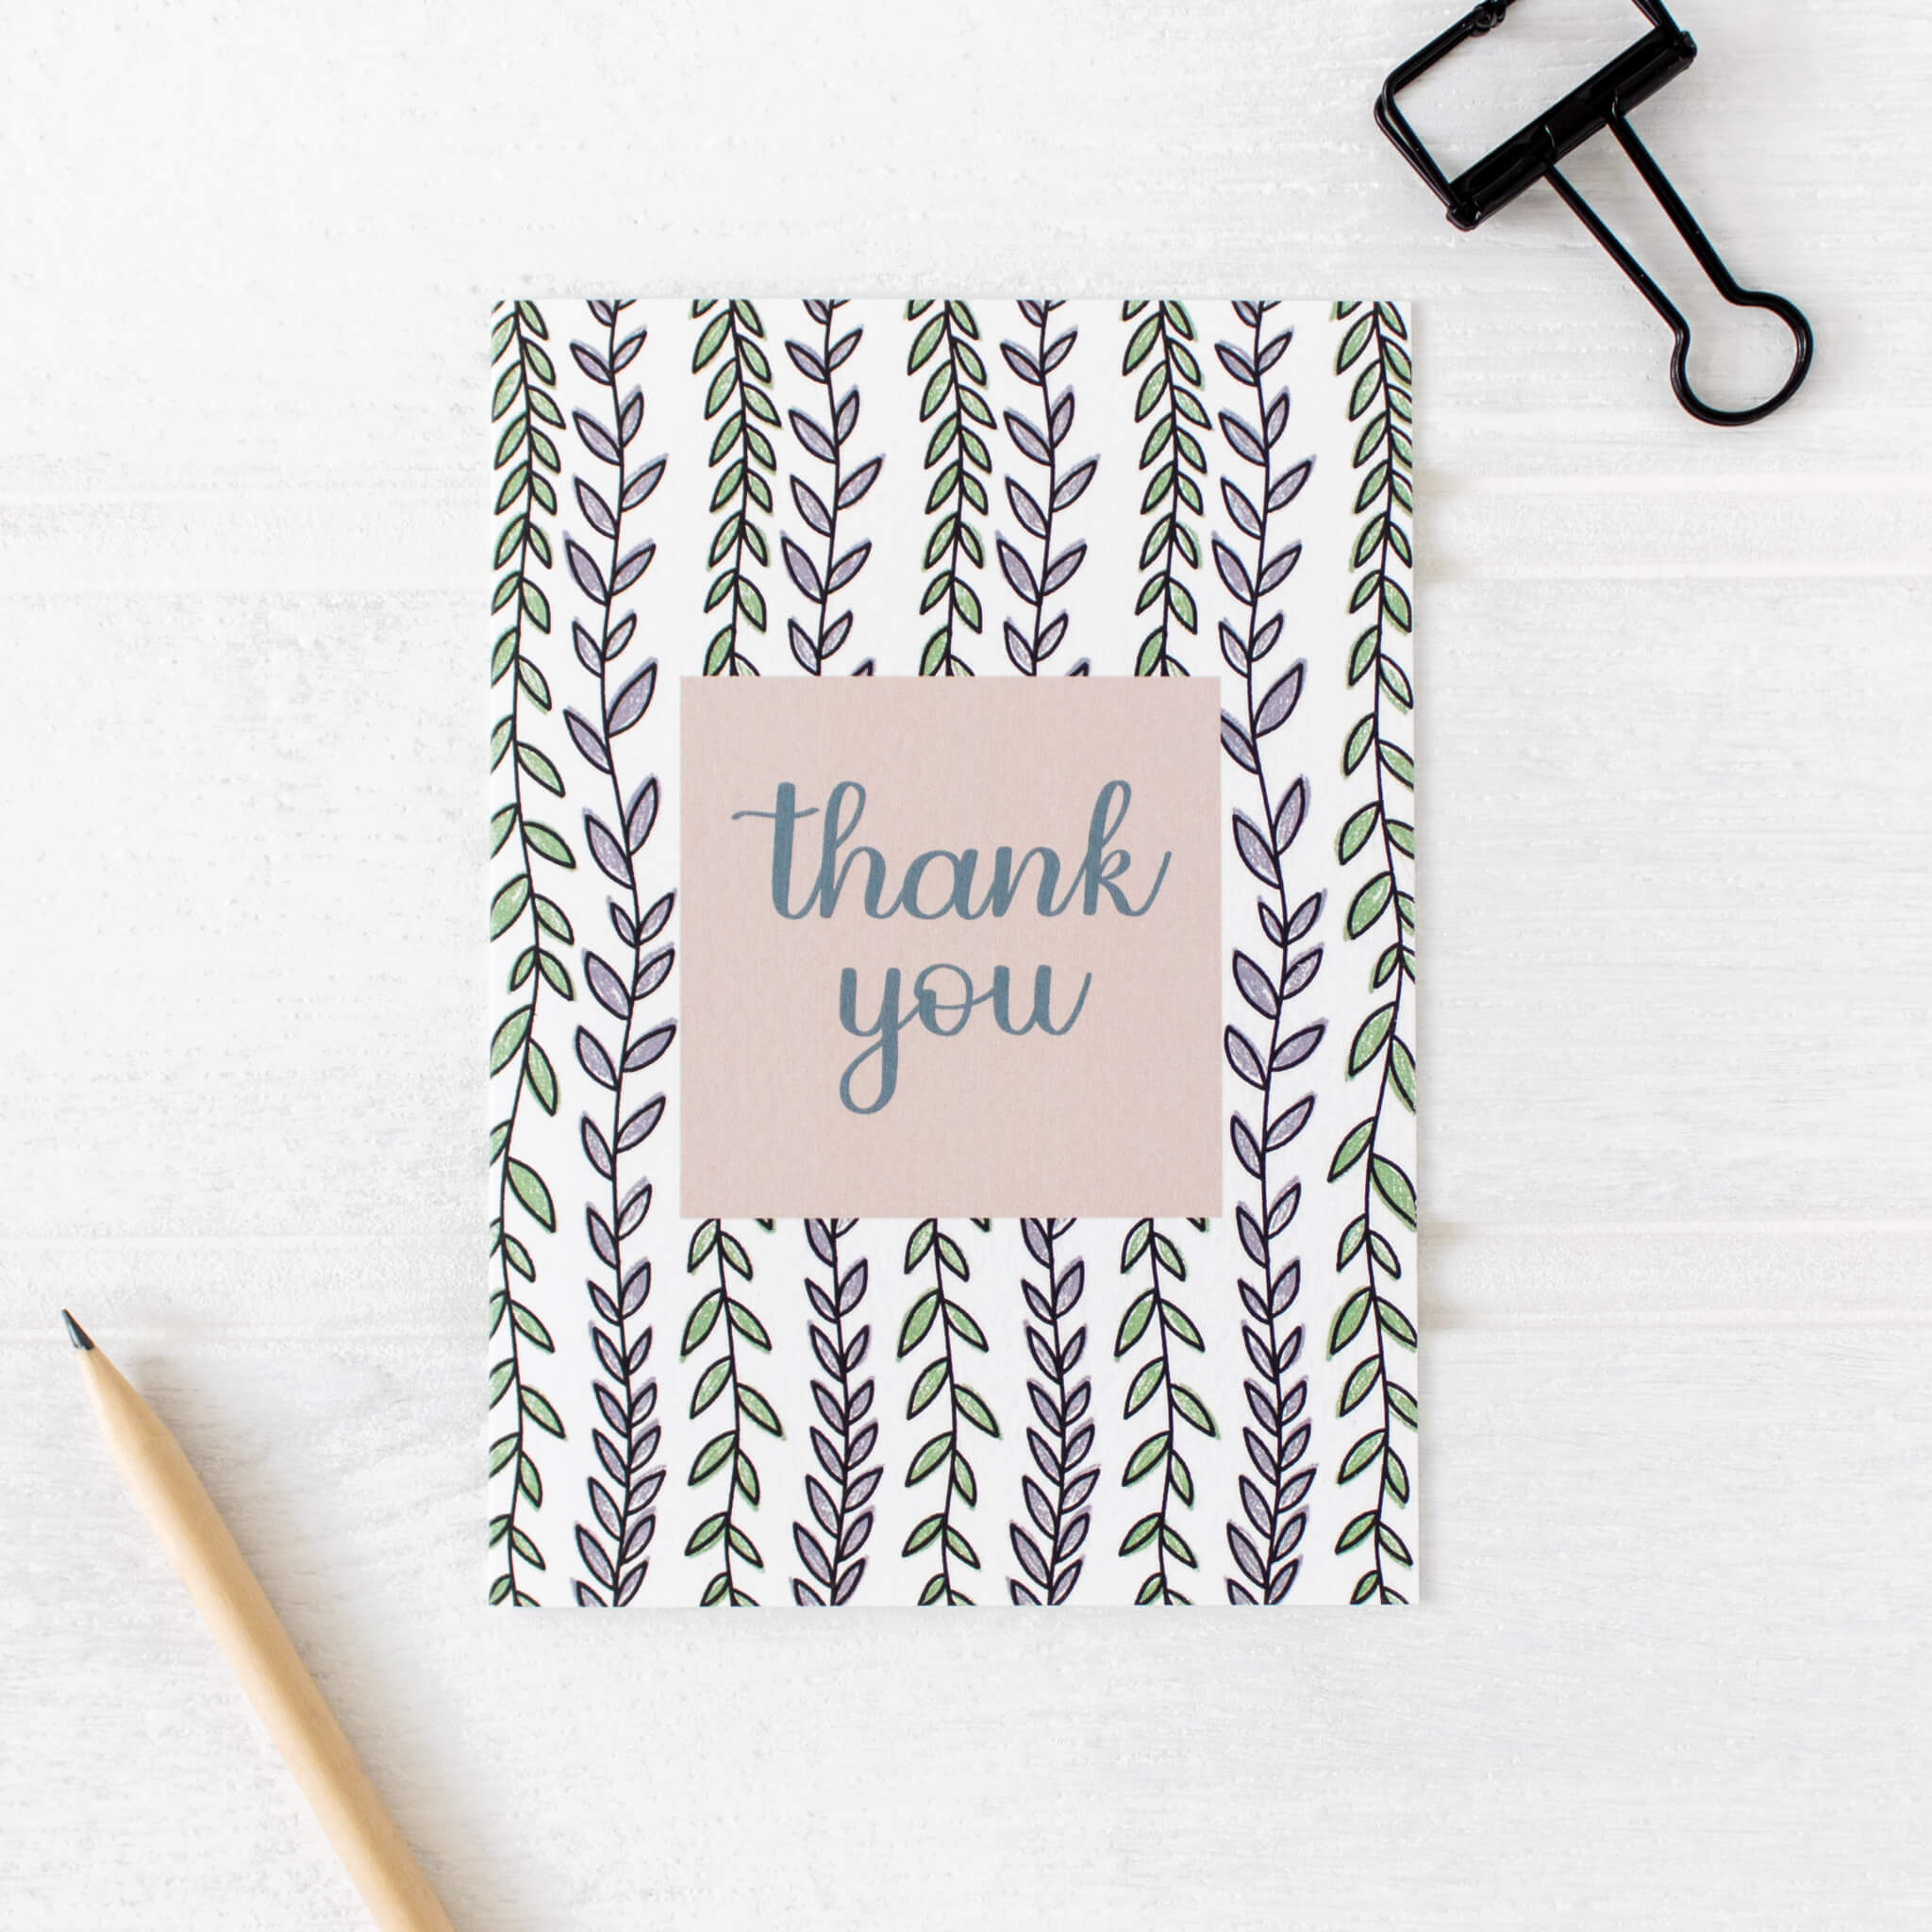 Luxury textured leafy thank you card in purple and green